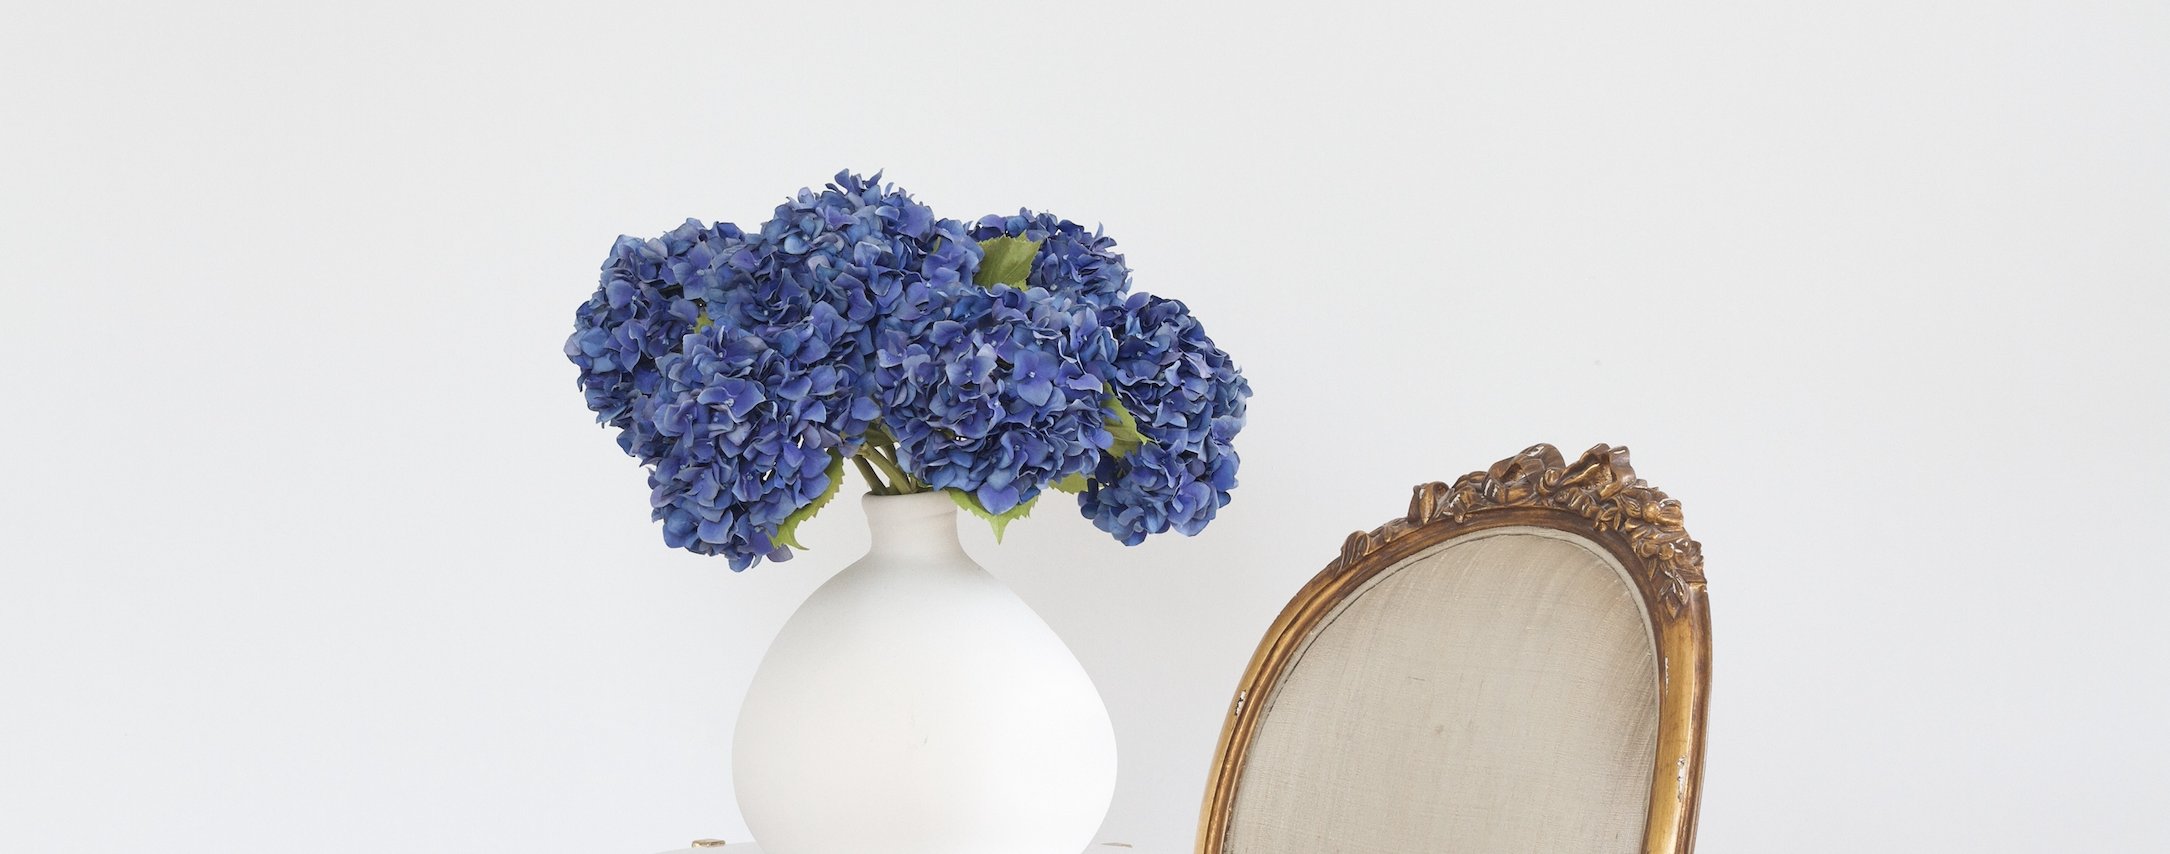 realistic blue artificial flowers don't look fake! Perfect blue faux flowers including navy blue silk flowers, artificial blue hydrangeas & artificial blue flowers in vase.